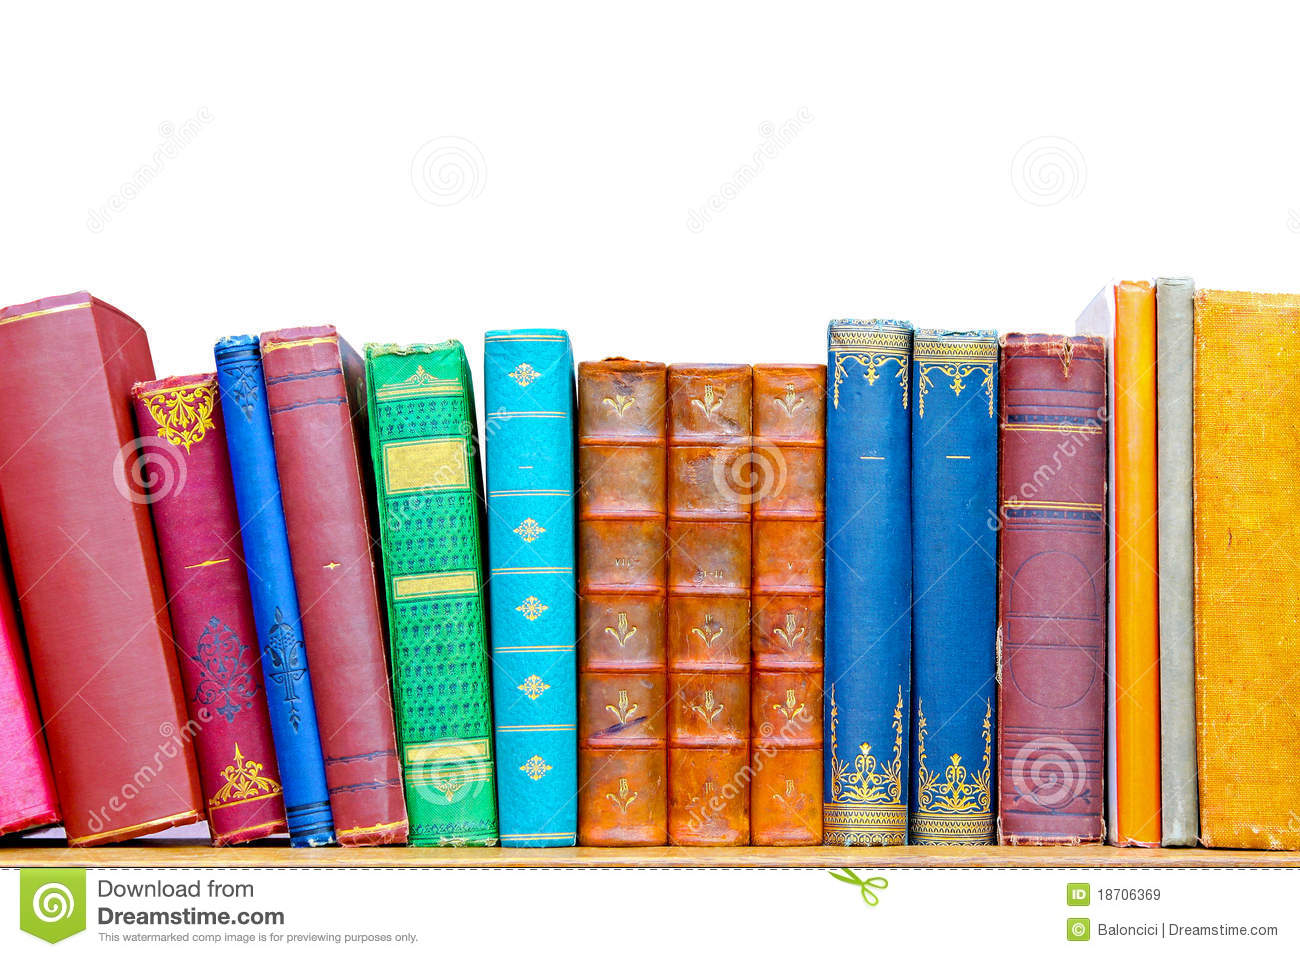 Books Royalty Free Stock Images   Image  18706369